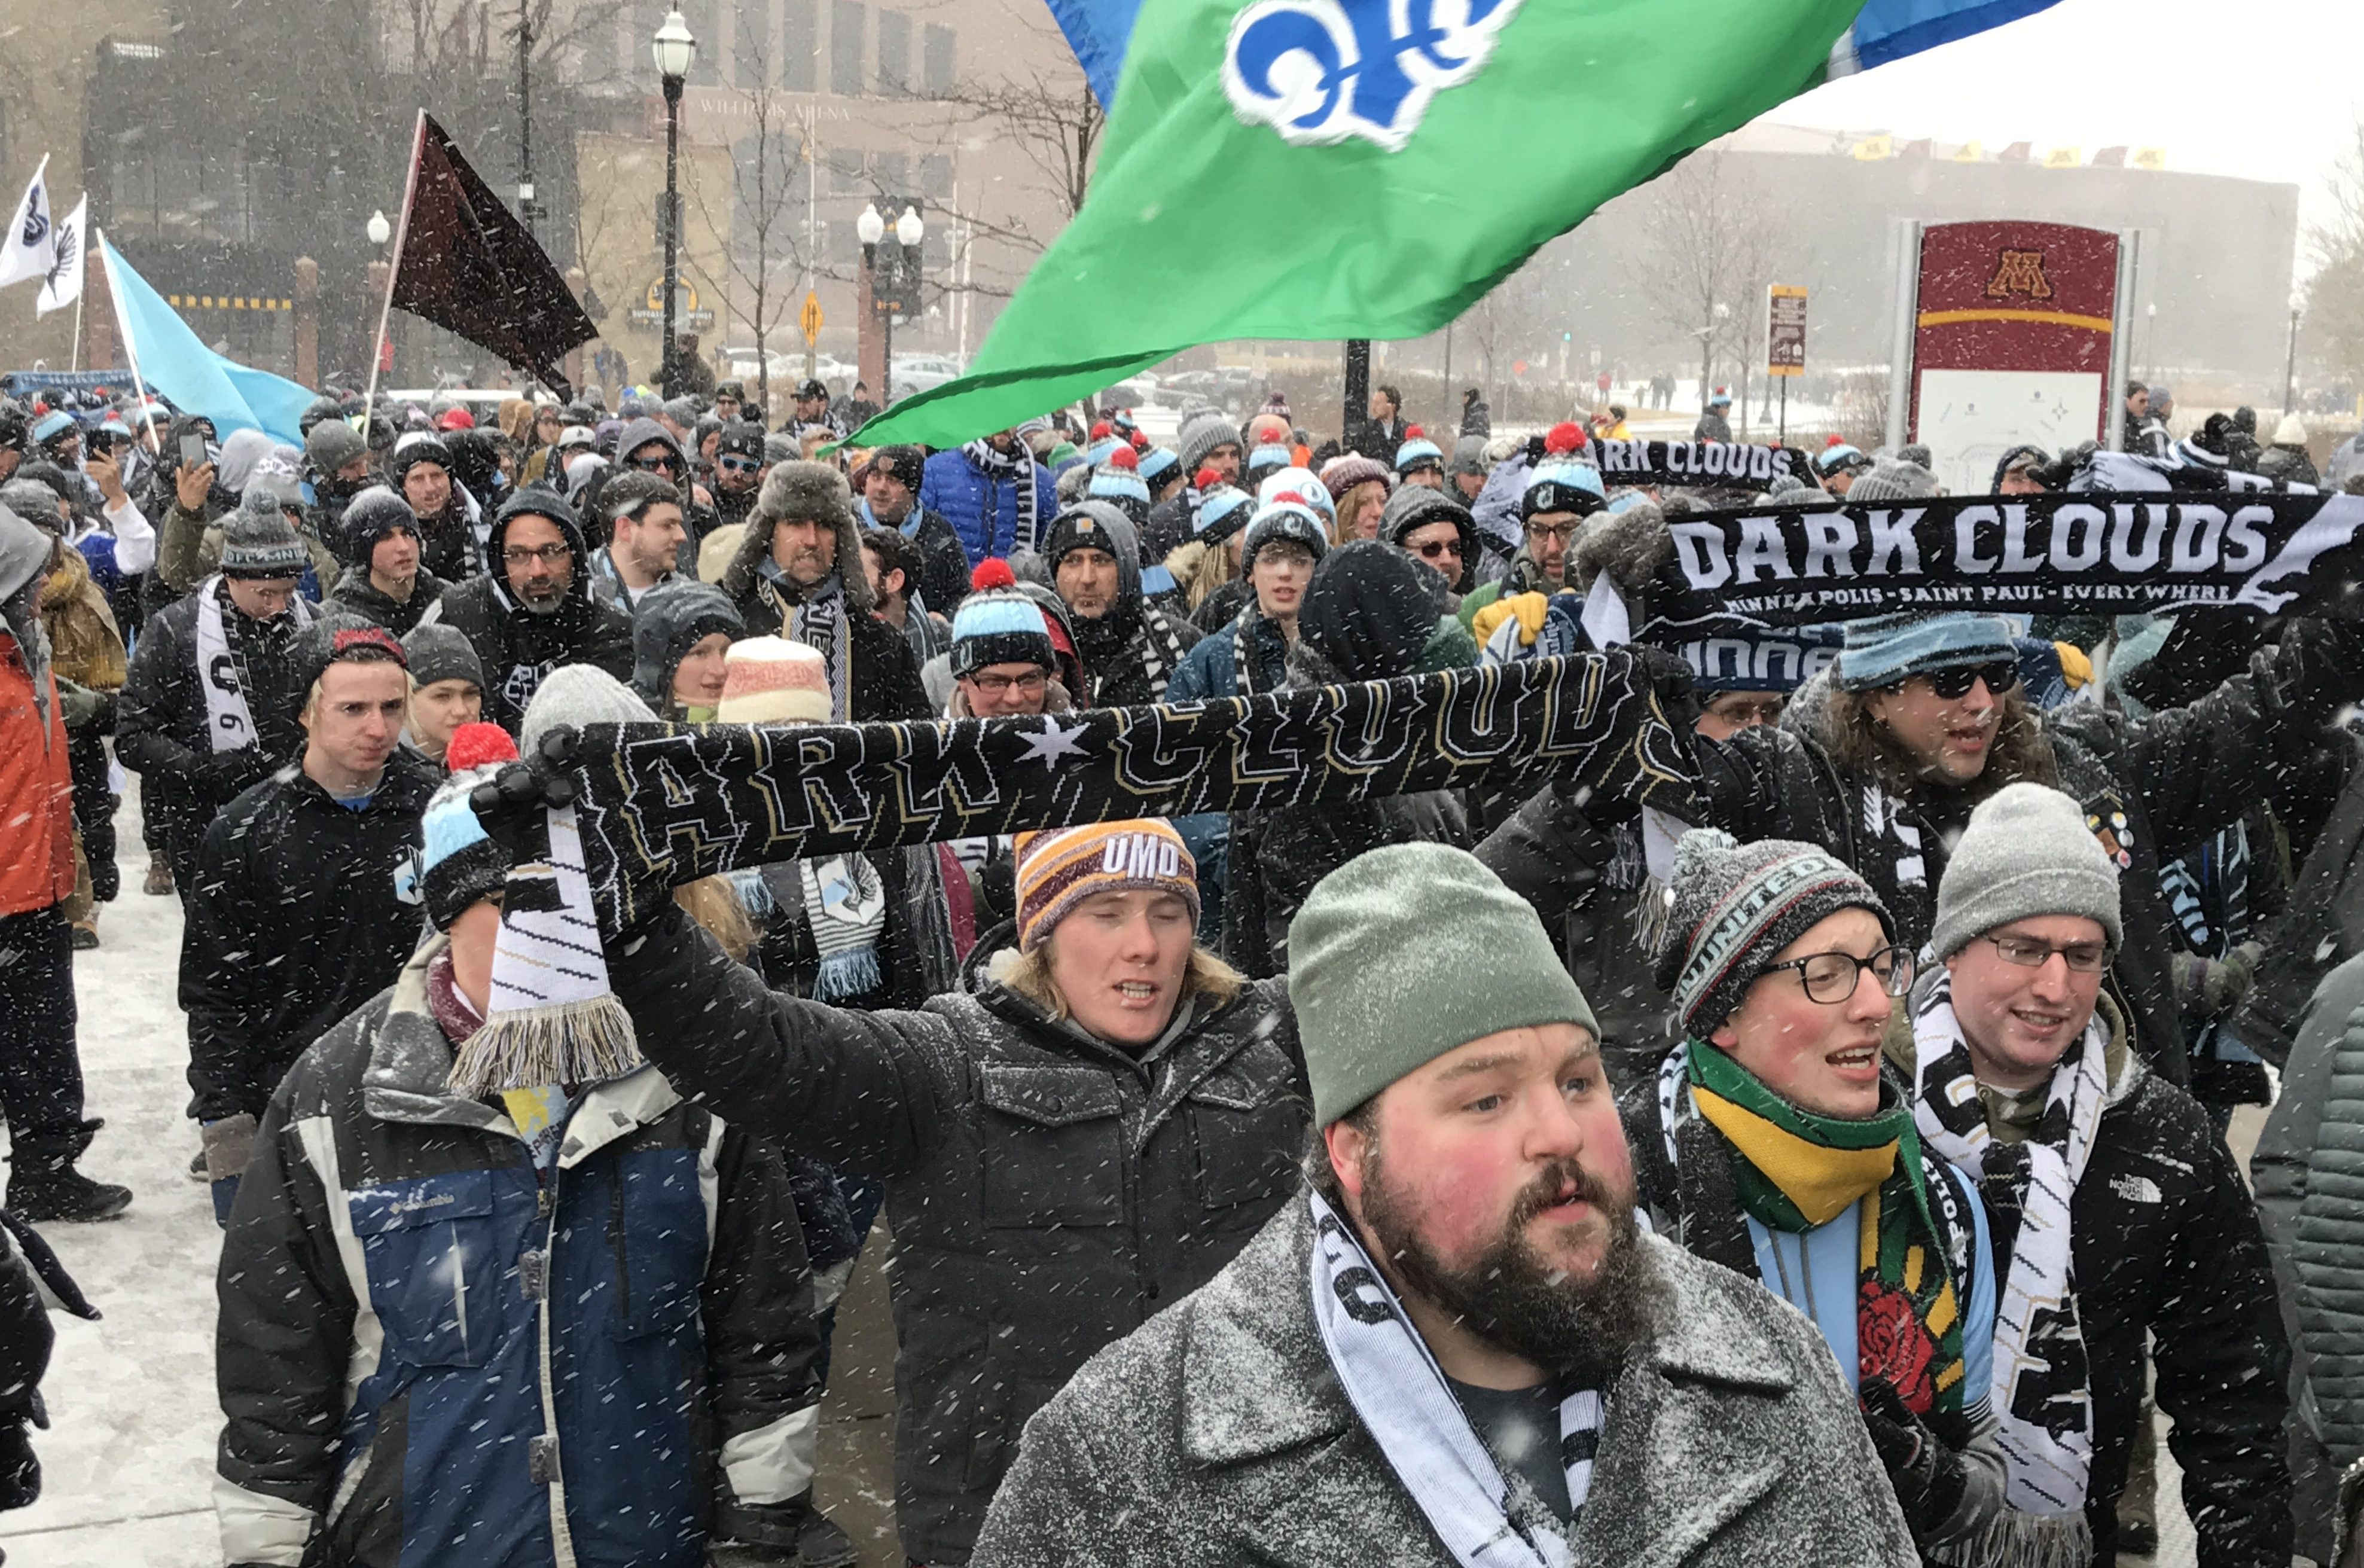 MLS Home Opener Meant Big Day for Soccer Fans in Minnesota